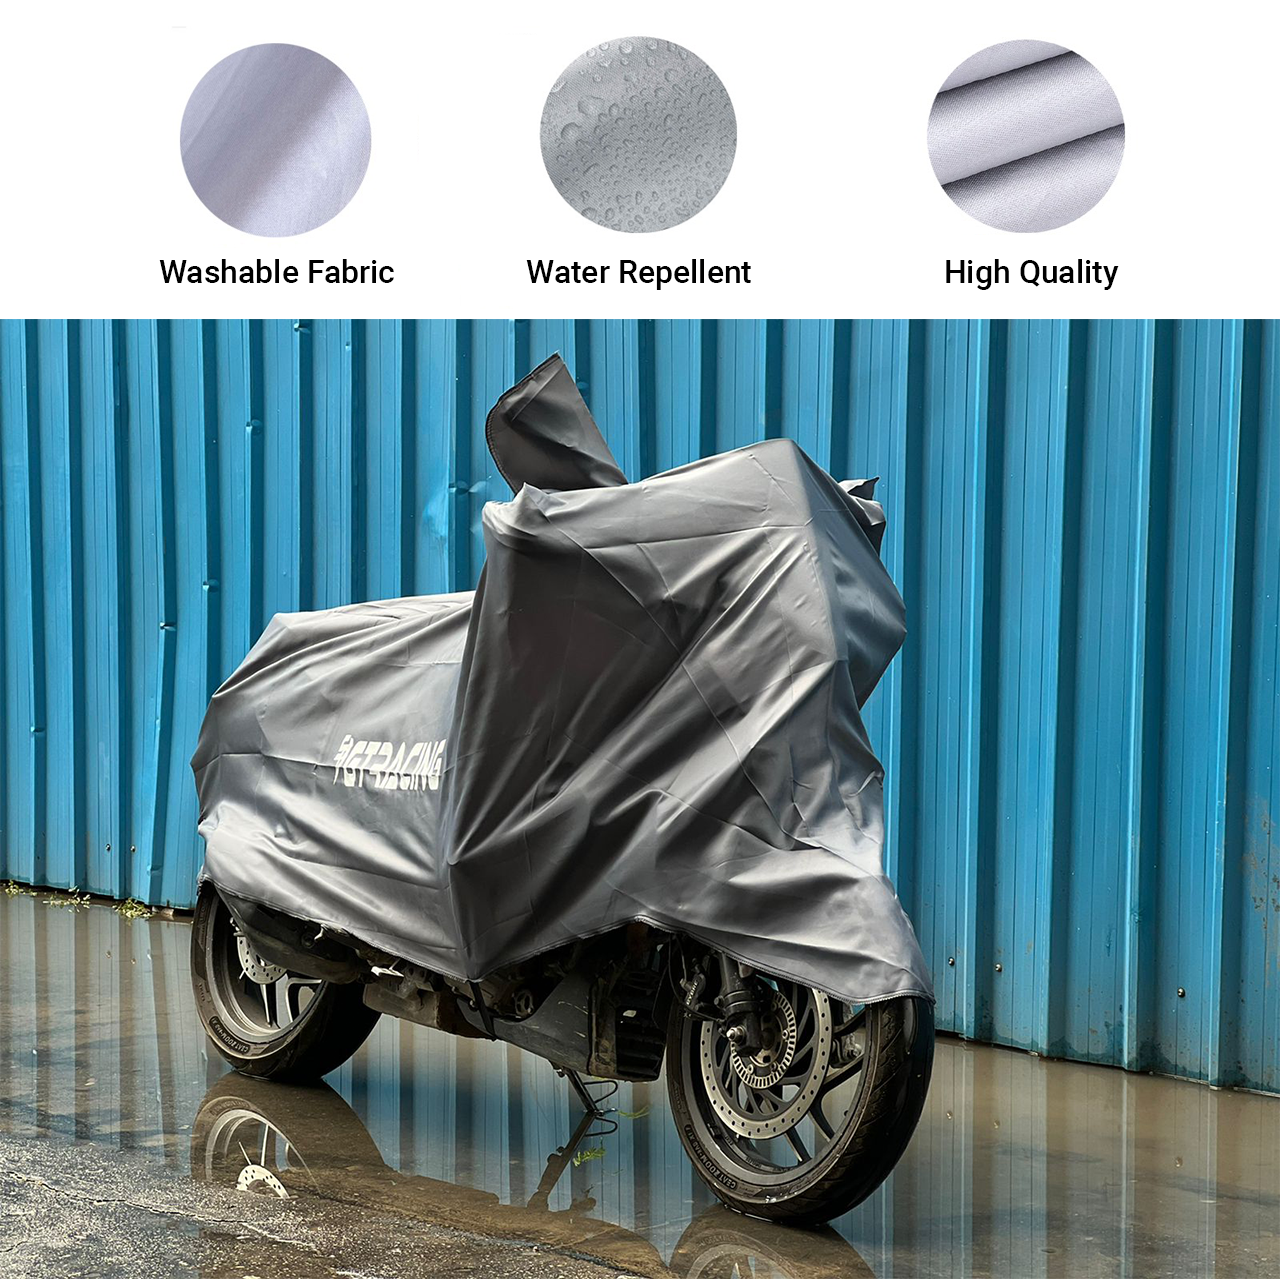 Steelbird Bike Cover GT Racing UV Protection Water-Resistant & Dustproof (Silver Matty), Bike Body Cover With Carry Bag (All Sports Bikes And Above Cruiser Bikes Size)